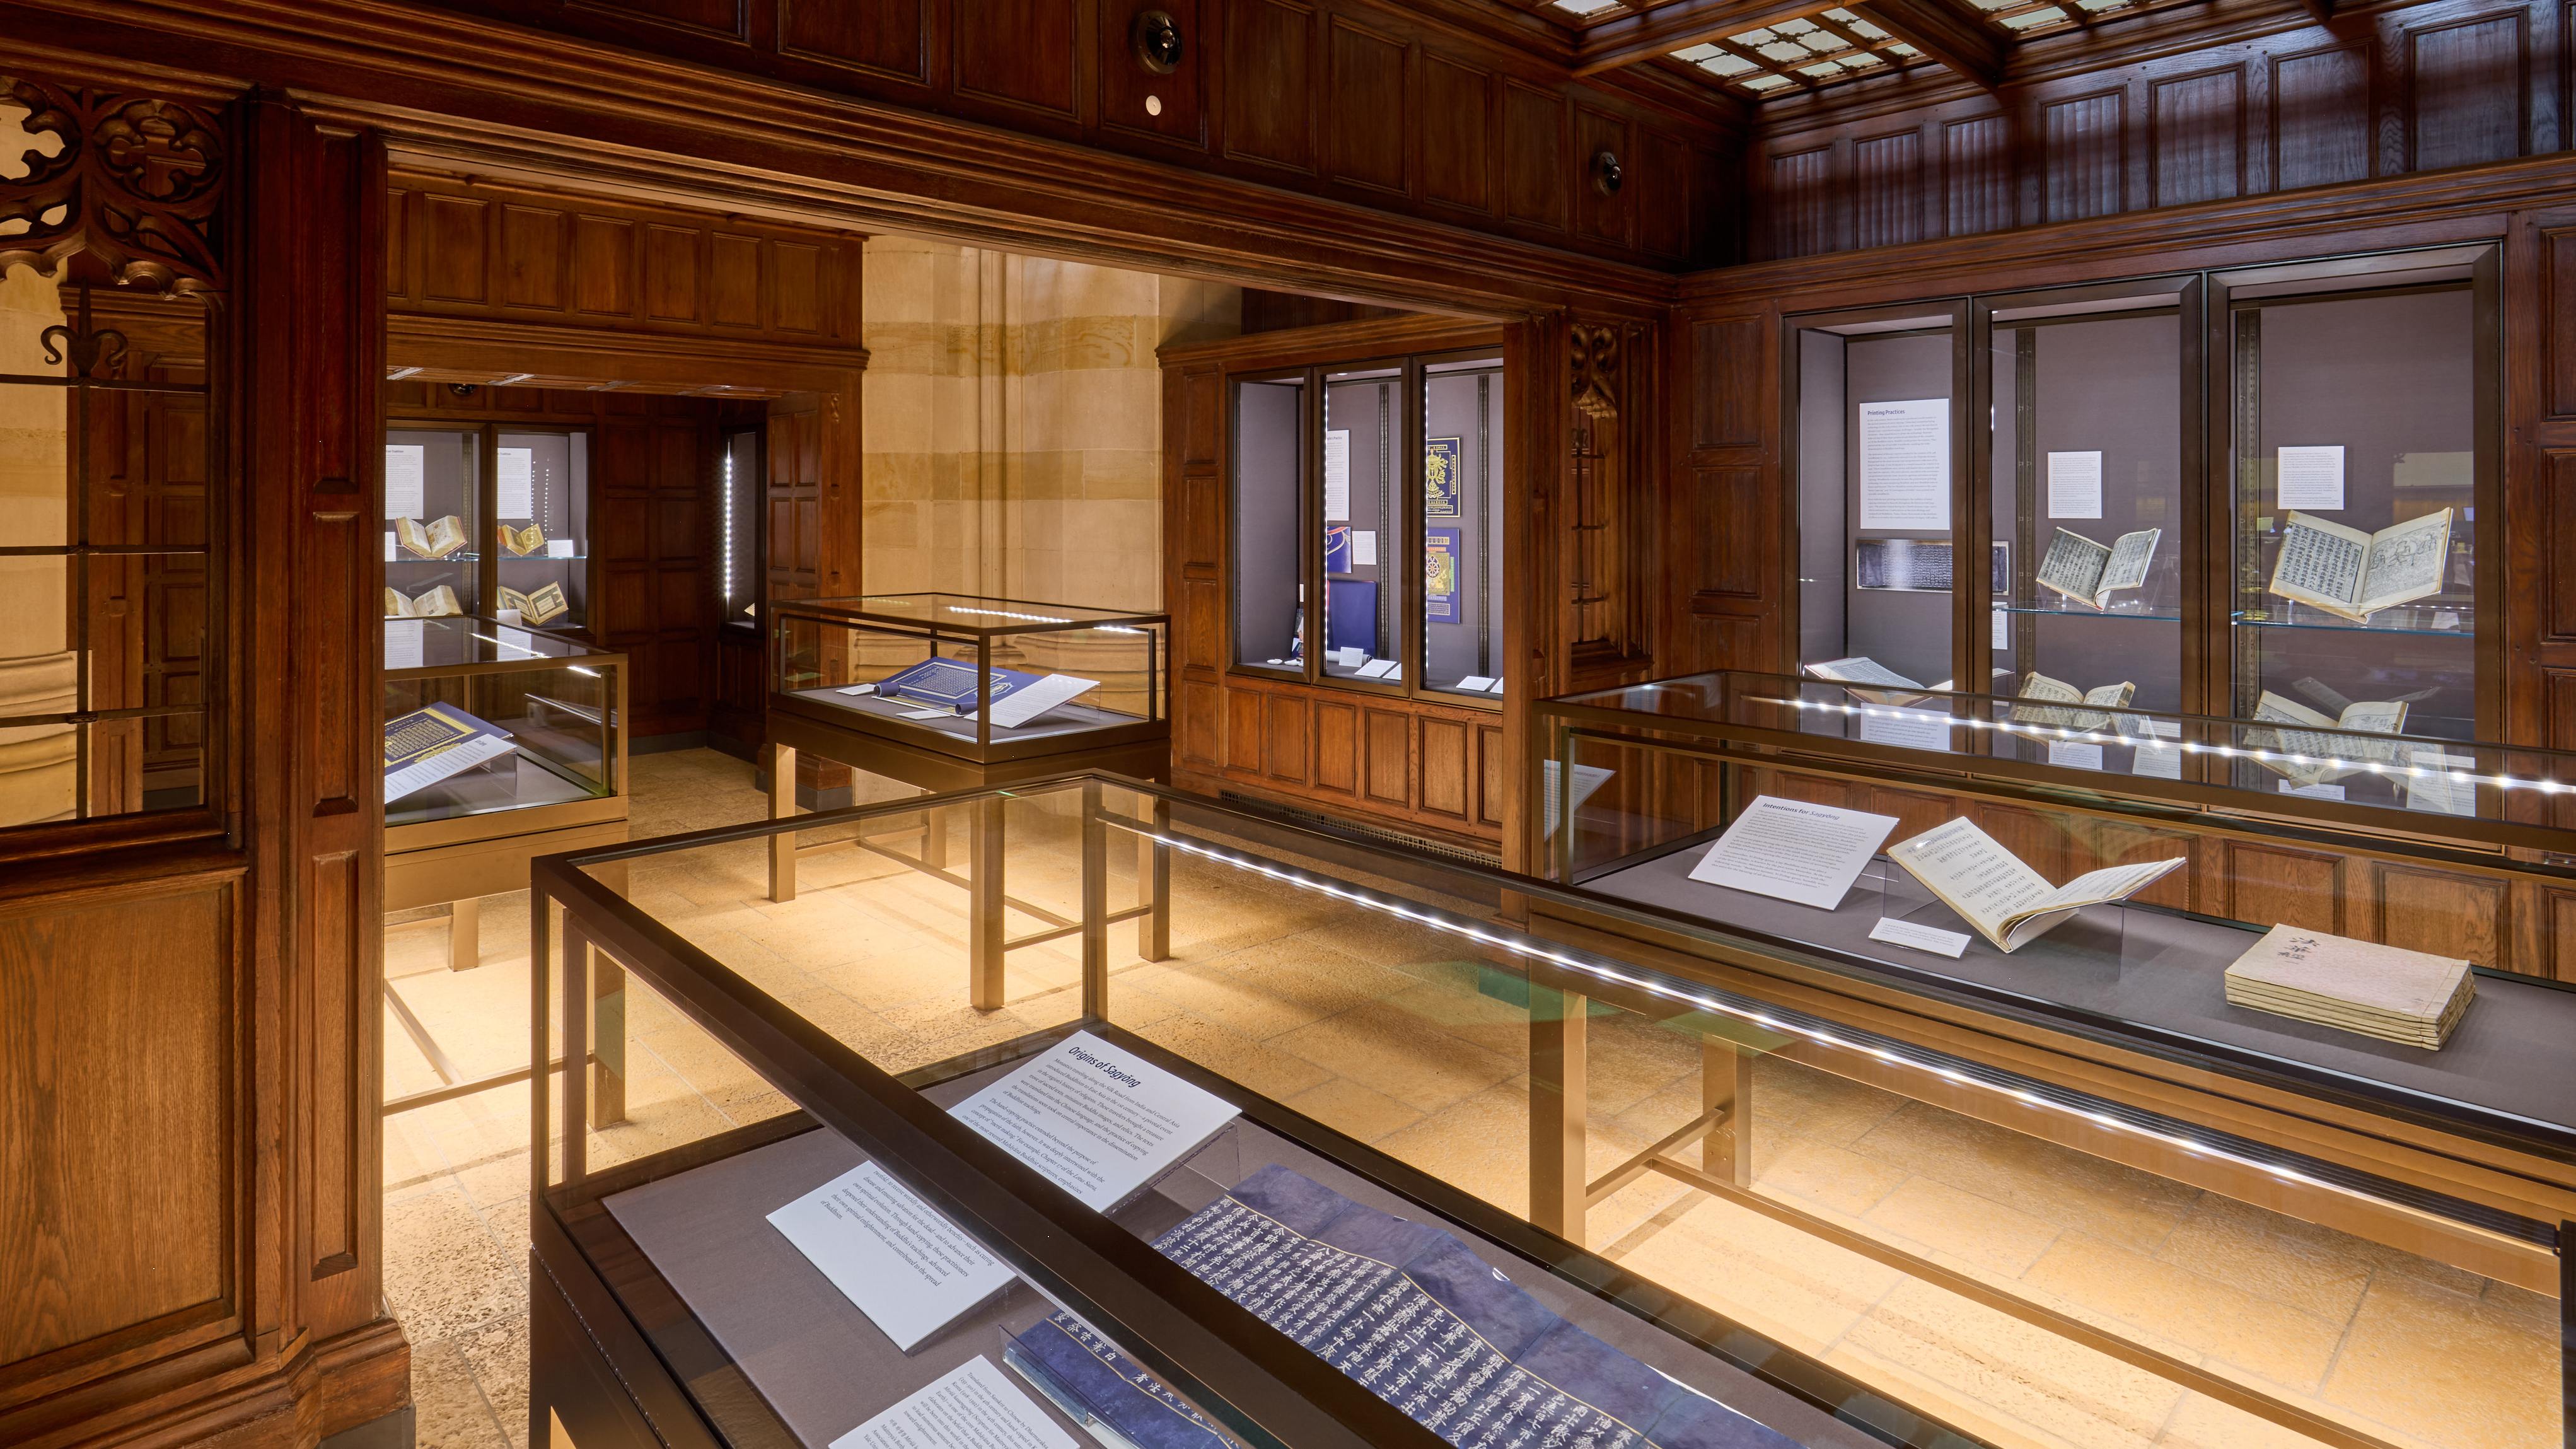 Panoramic view of gallery space with wood cabinetry, glass table and wall cases. In foreground is visible a long indigo-blue scroll with gold Korean characters